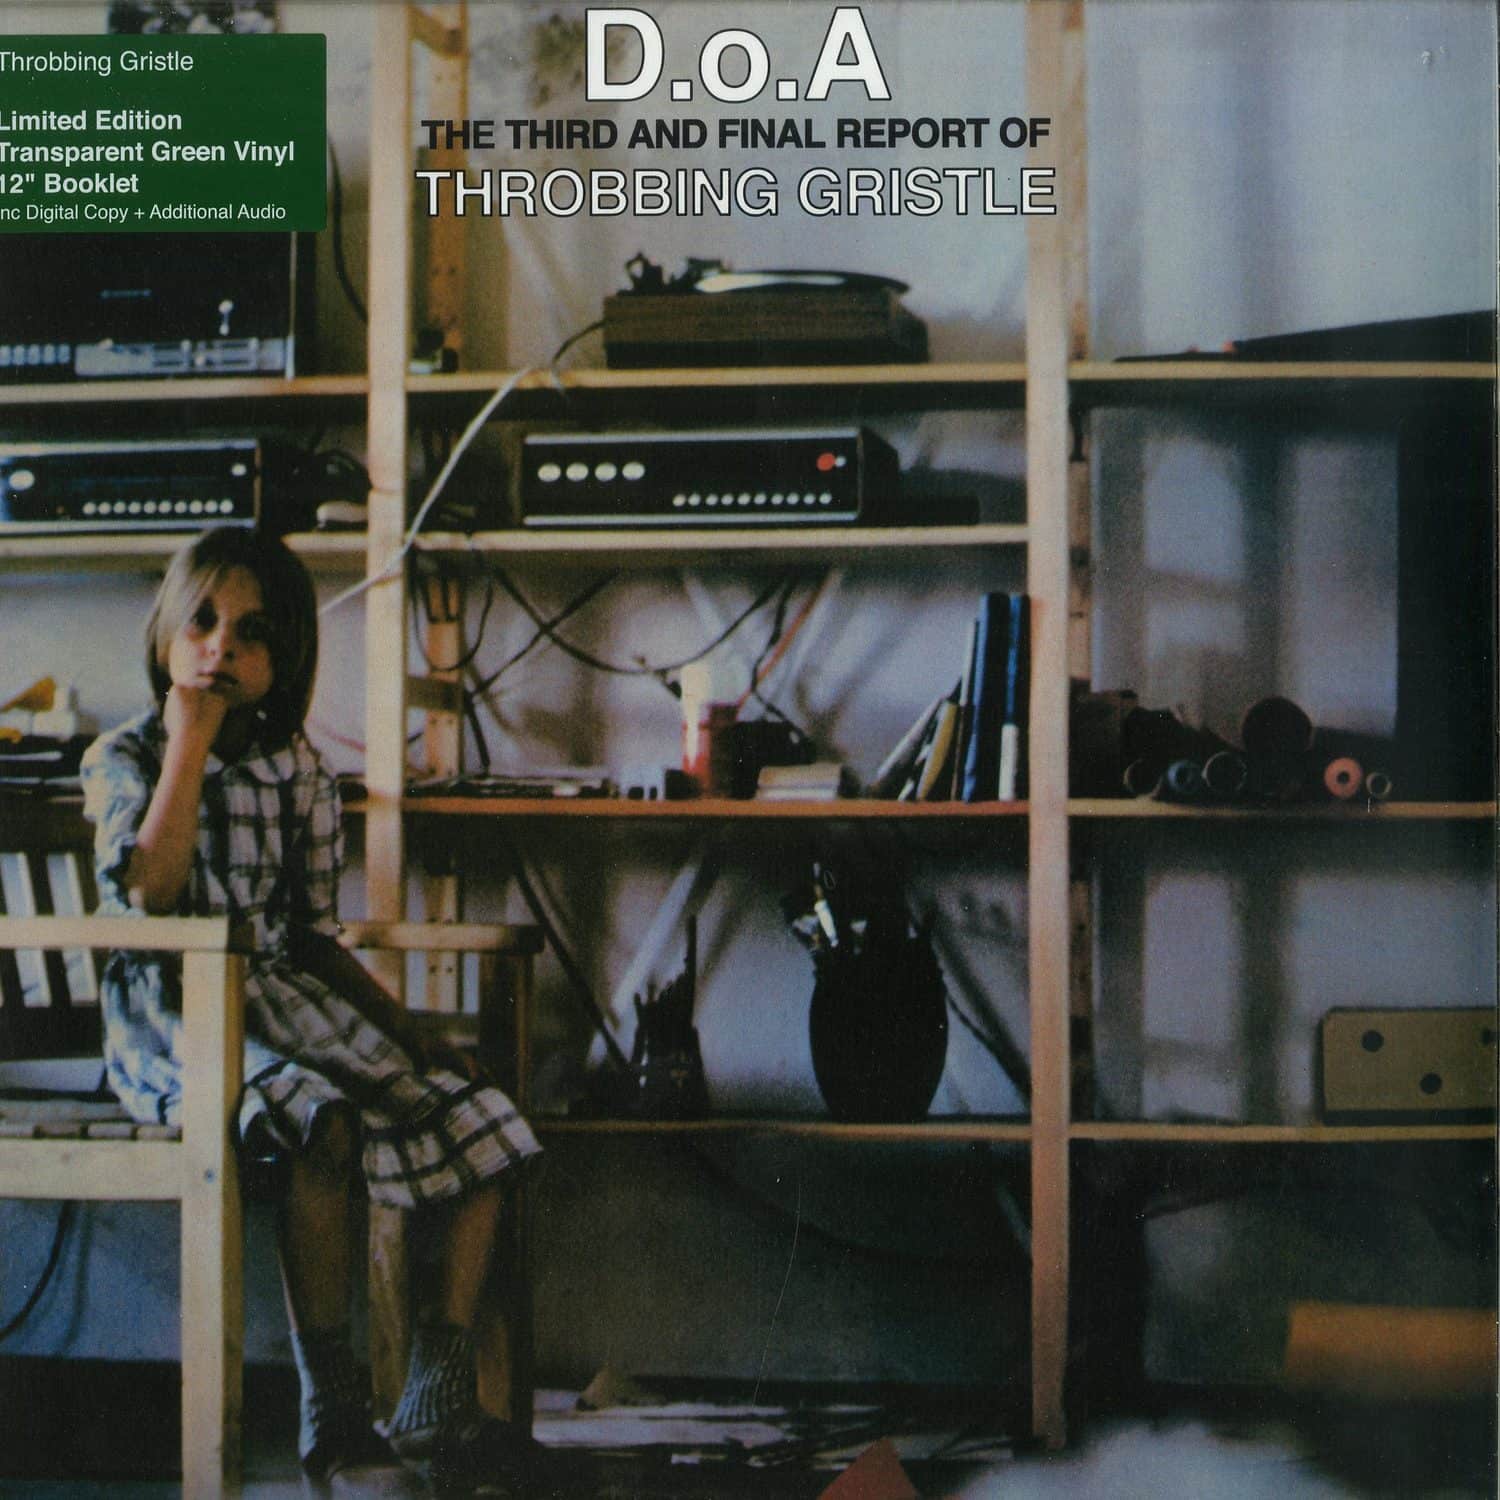 Throbbing Gristle - D.O.A. THE THIRD AND FINAL REPORT 